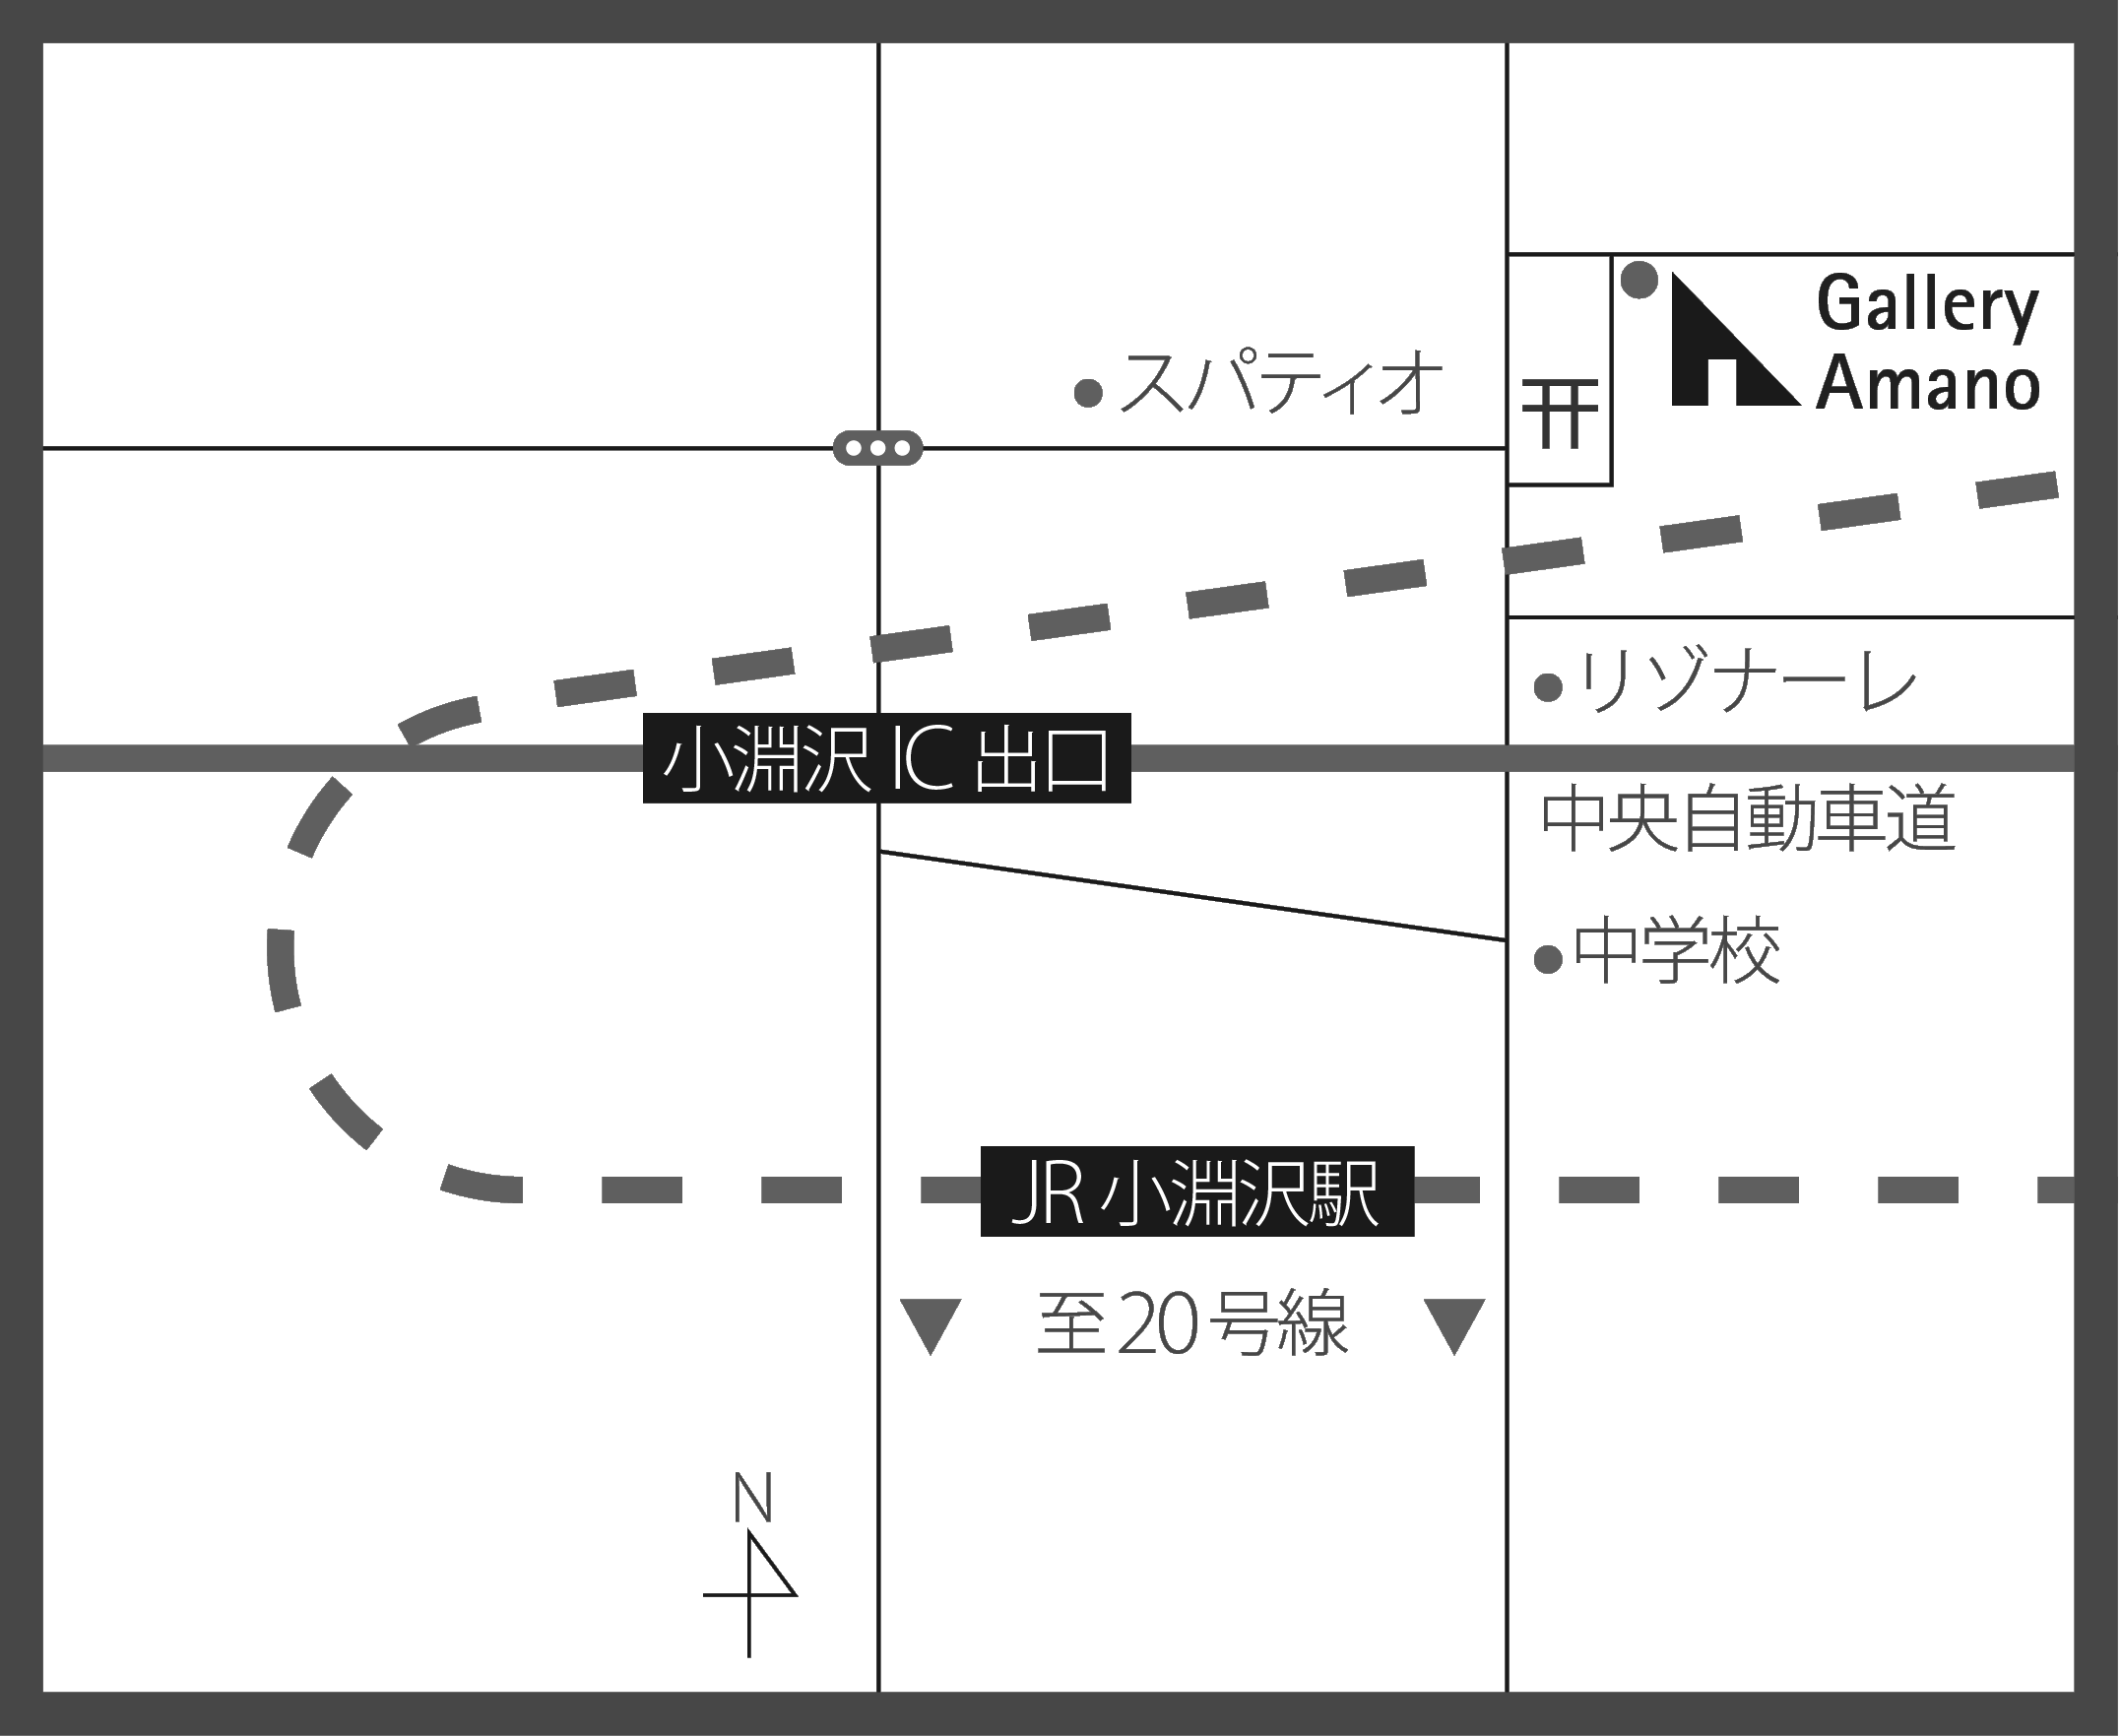 Gallery Amano Map